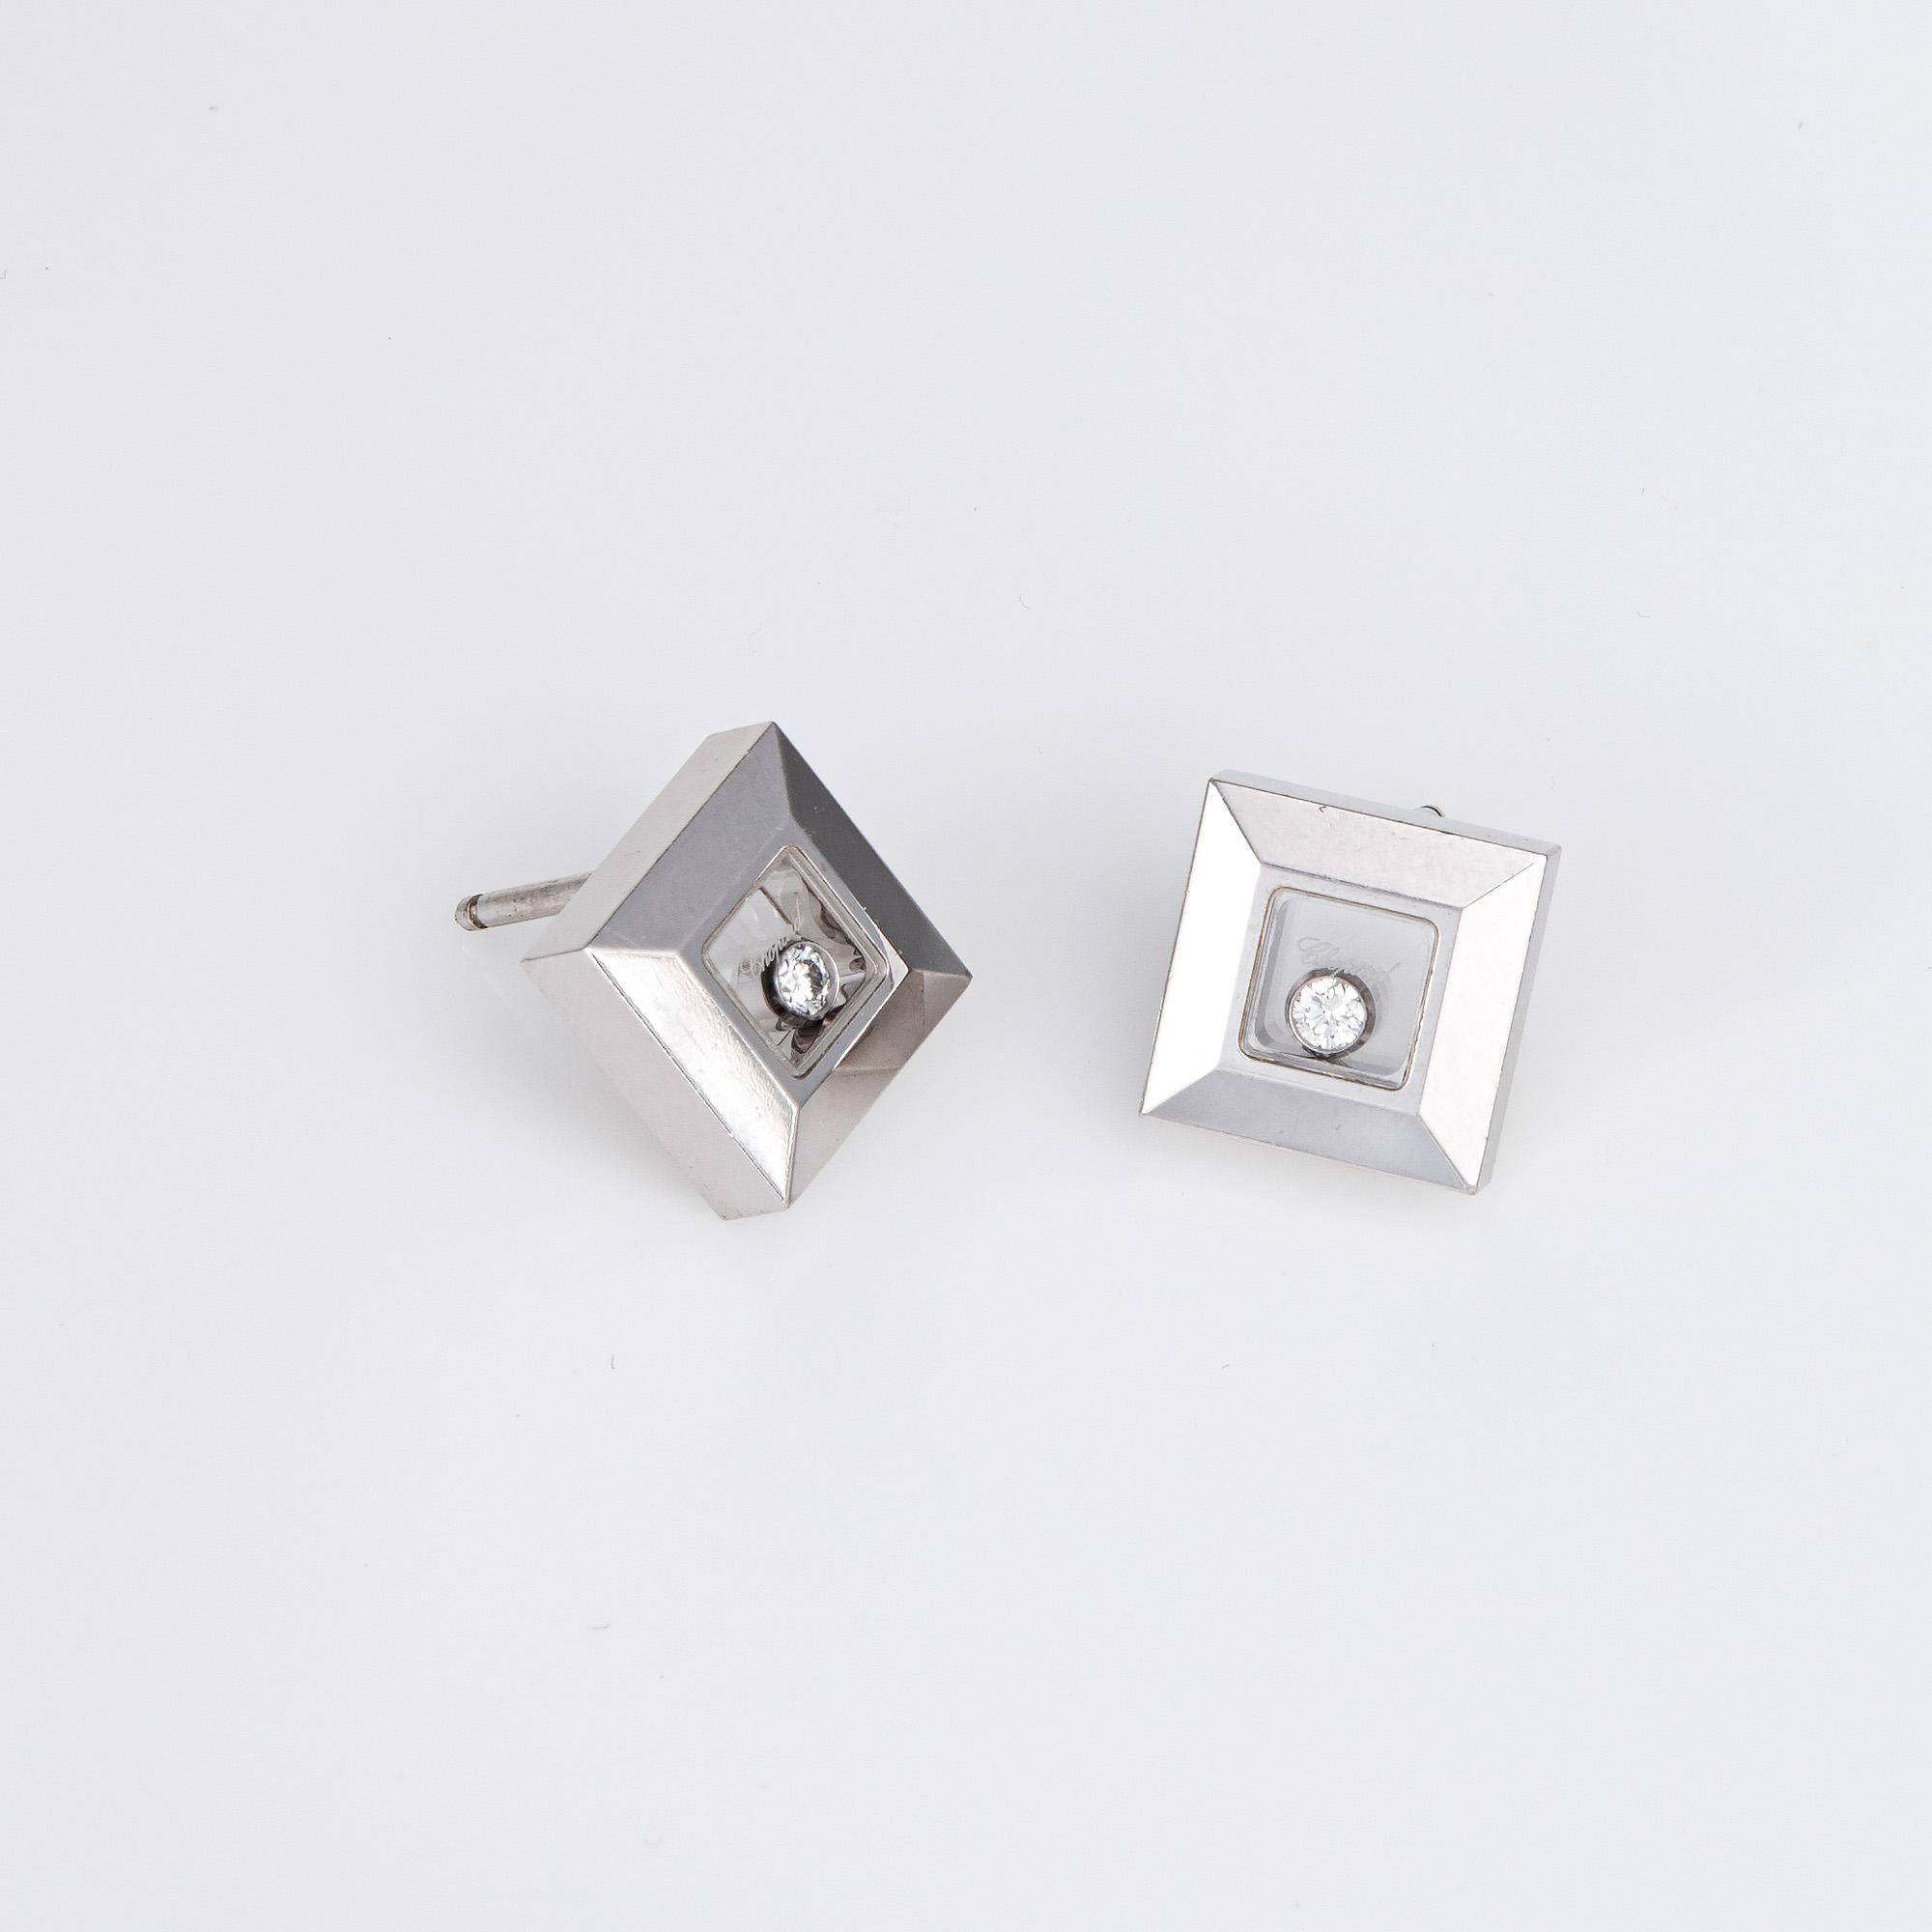 Elegant pair of pre-owned Chopard Happy Diamonds square stud earrings (circa 2010) crafted in 18k white gold. 

Round brilliant cut diamonds total 0.11 carats (estimated at G-H color and VS2 clarity). 

The square stud earrings are set with floating